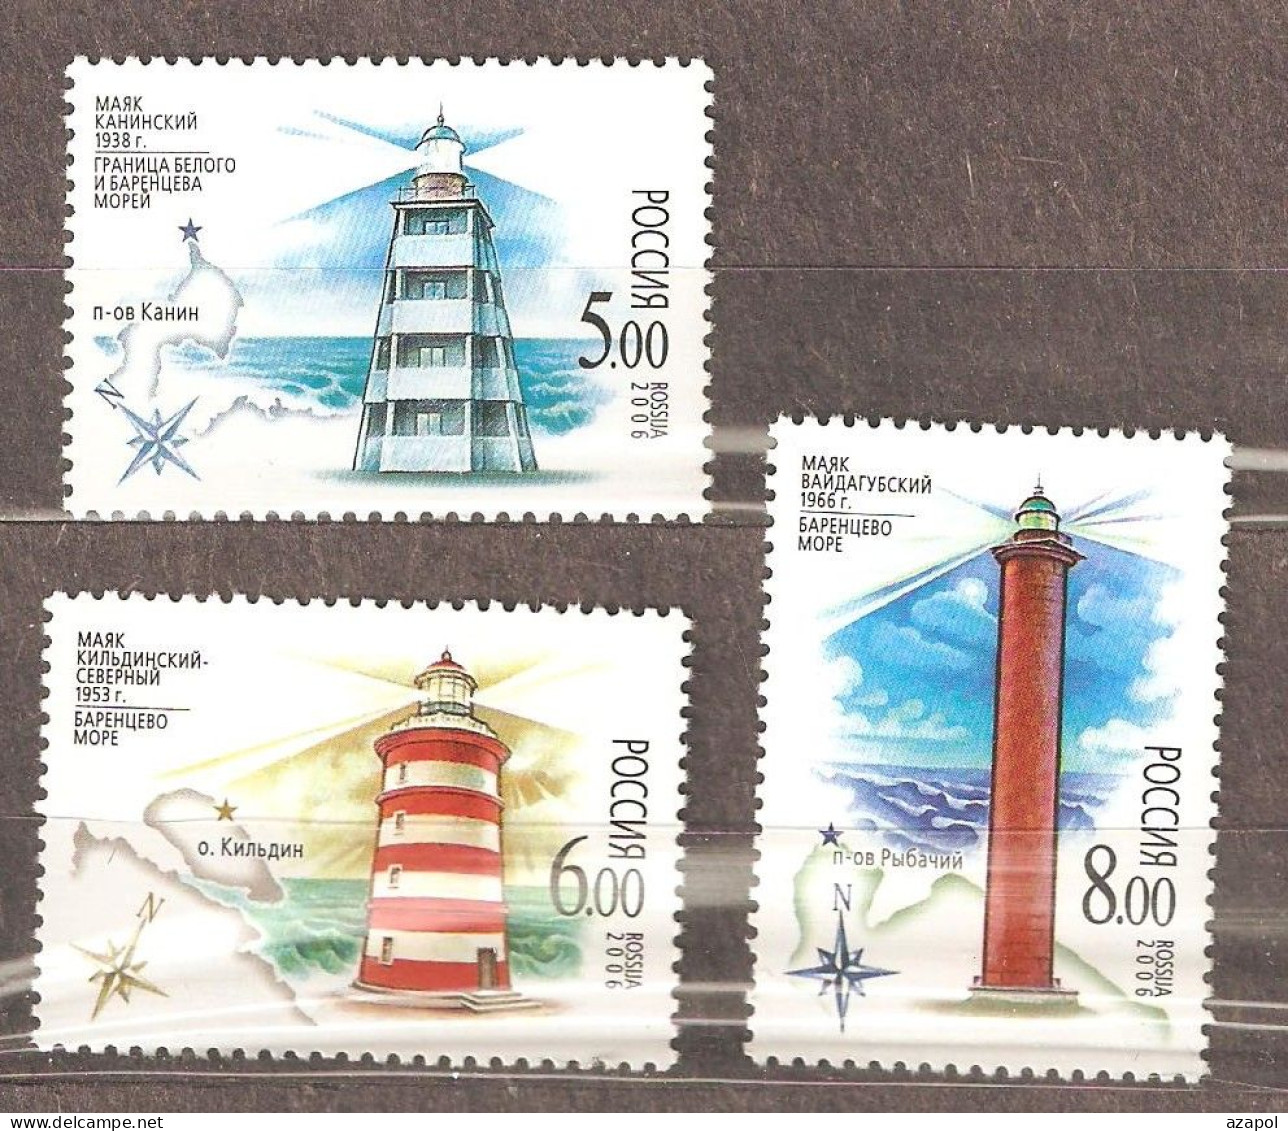 Russia: Full Set Of 3 Mint Stamps, Lighthouses Of Barents Sea, 2006, Mi#1368-70, MNH - Lighthouses